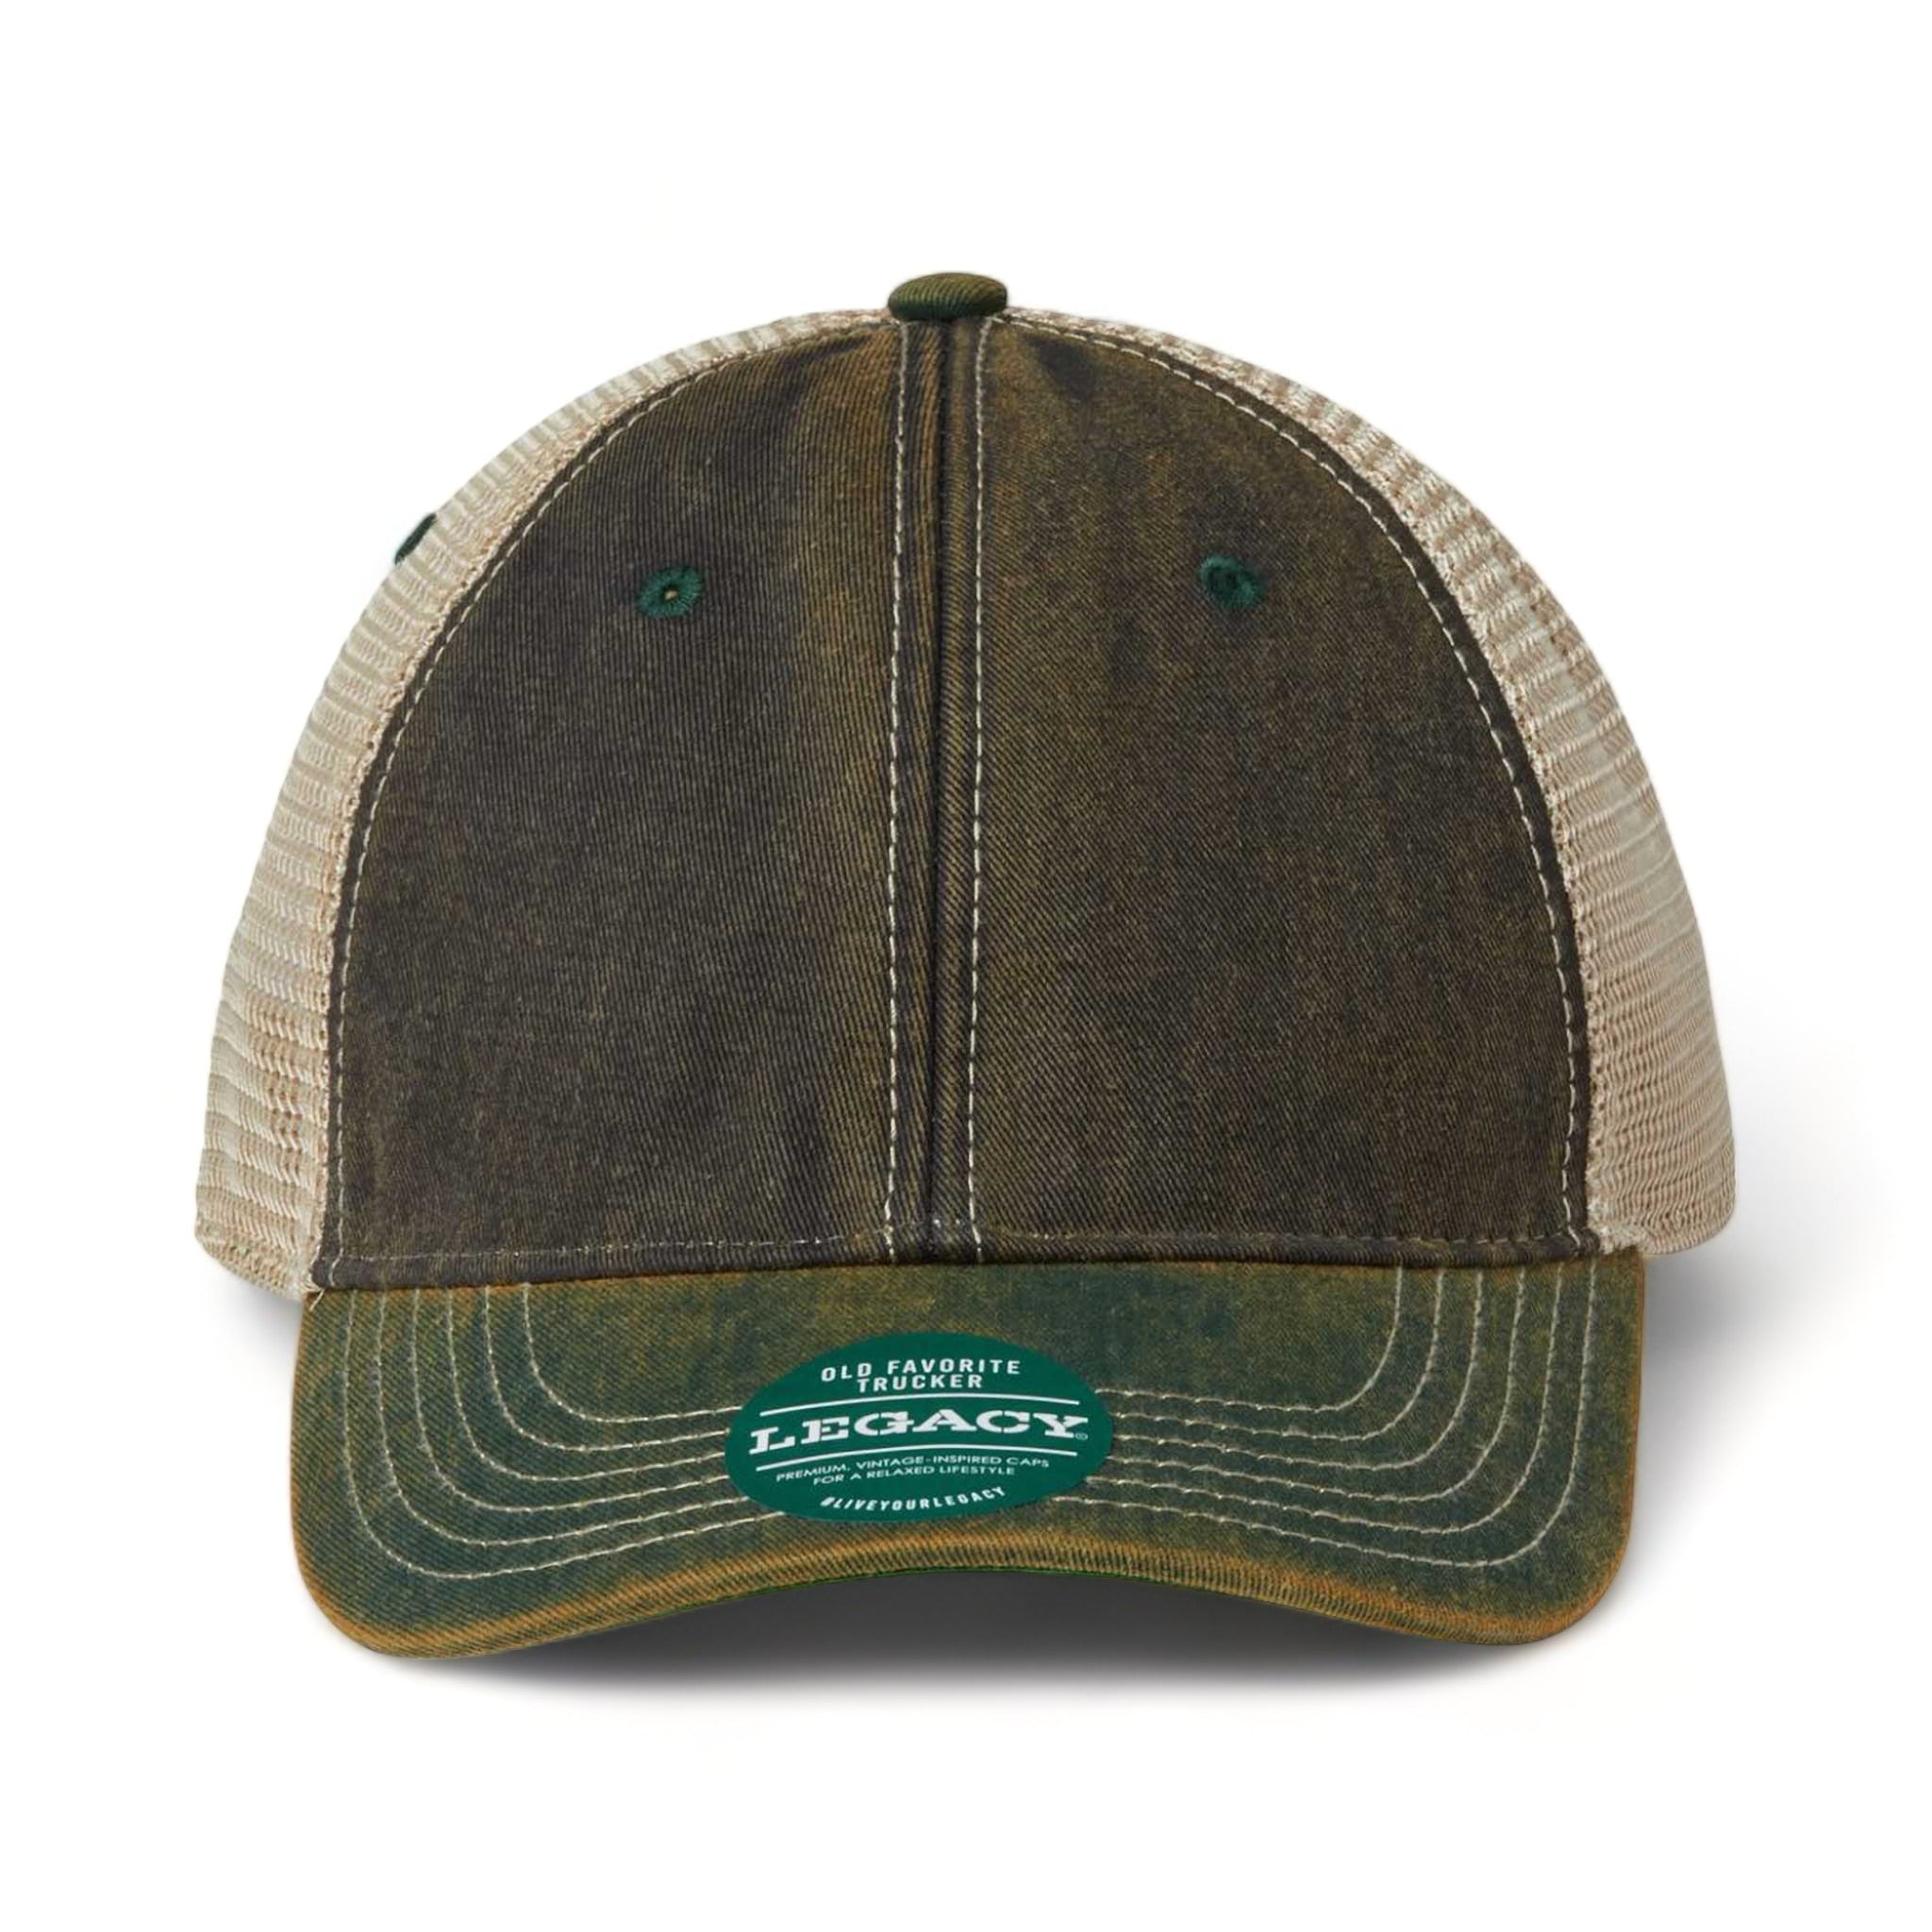 Front view of LEGACY OFA custom hat in black, green and khaki